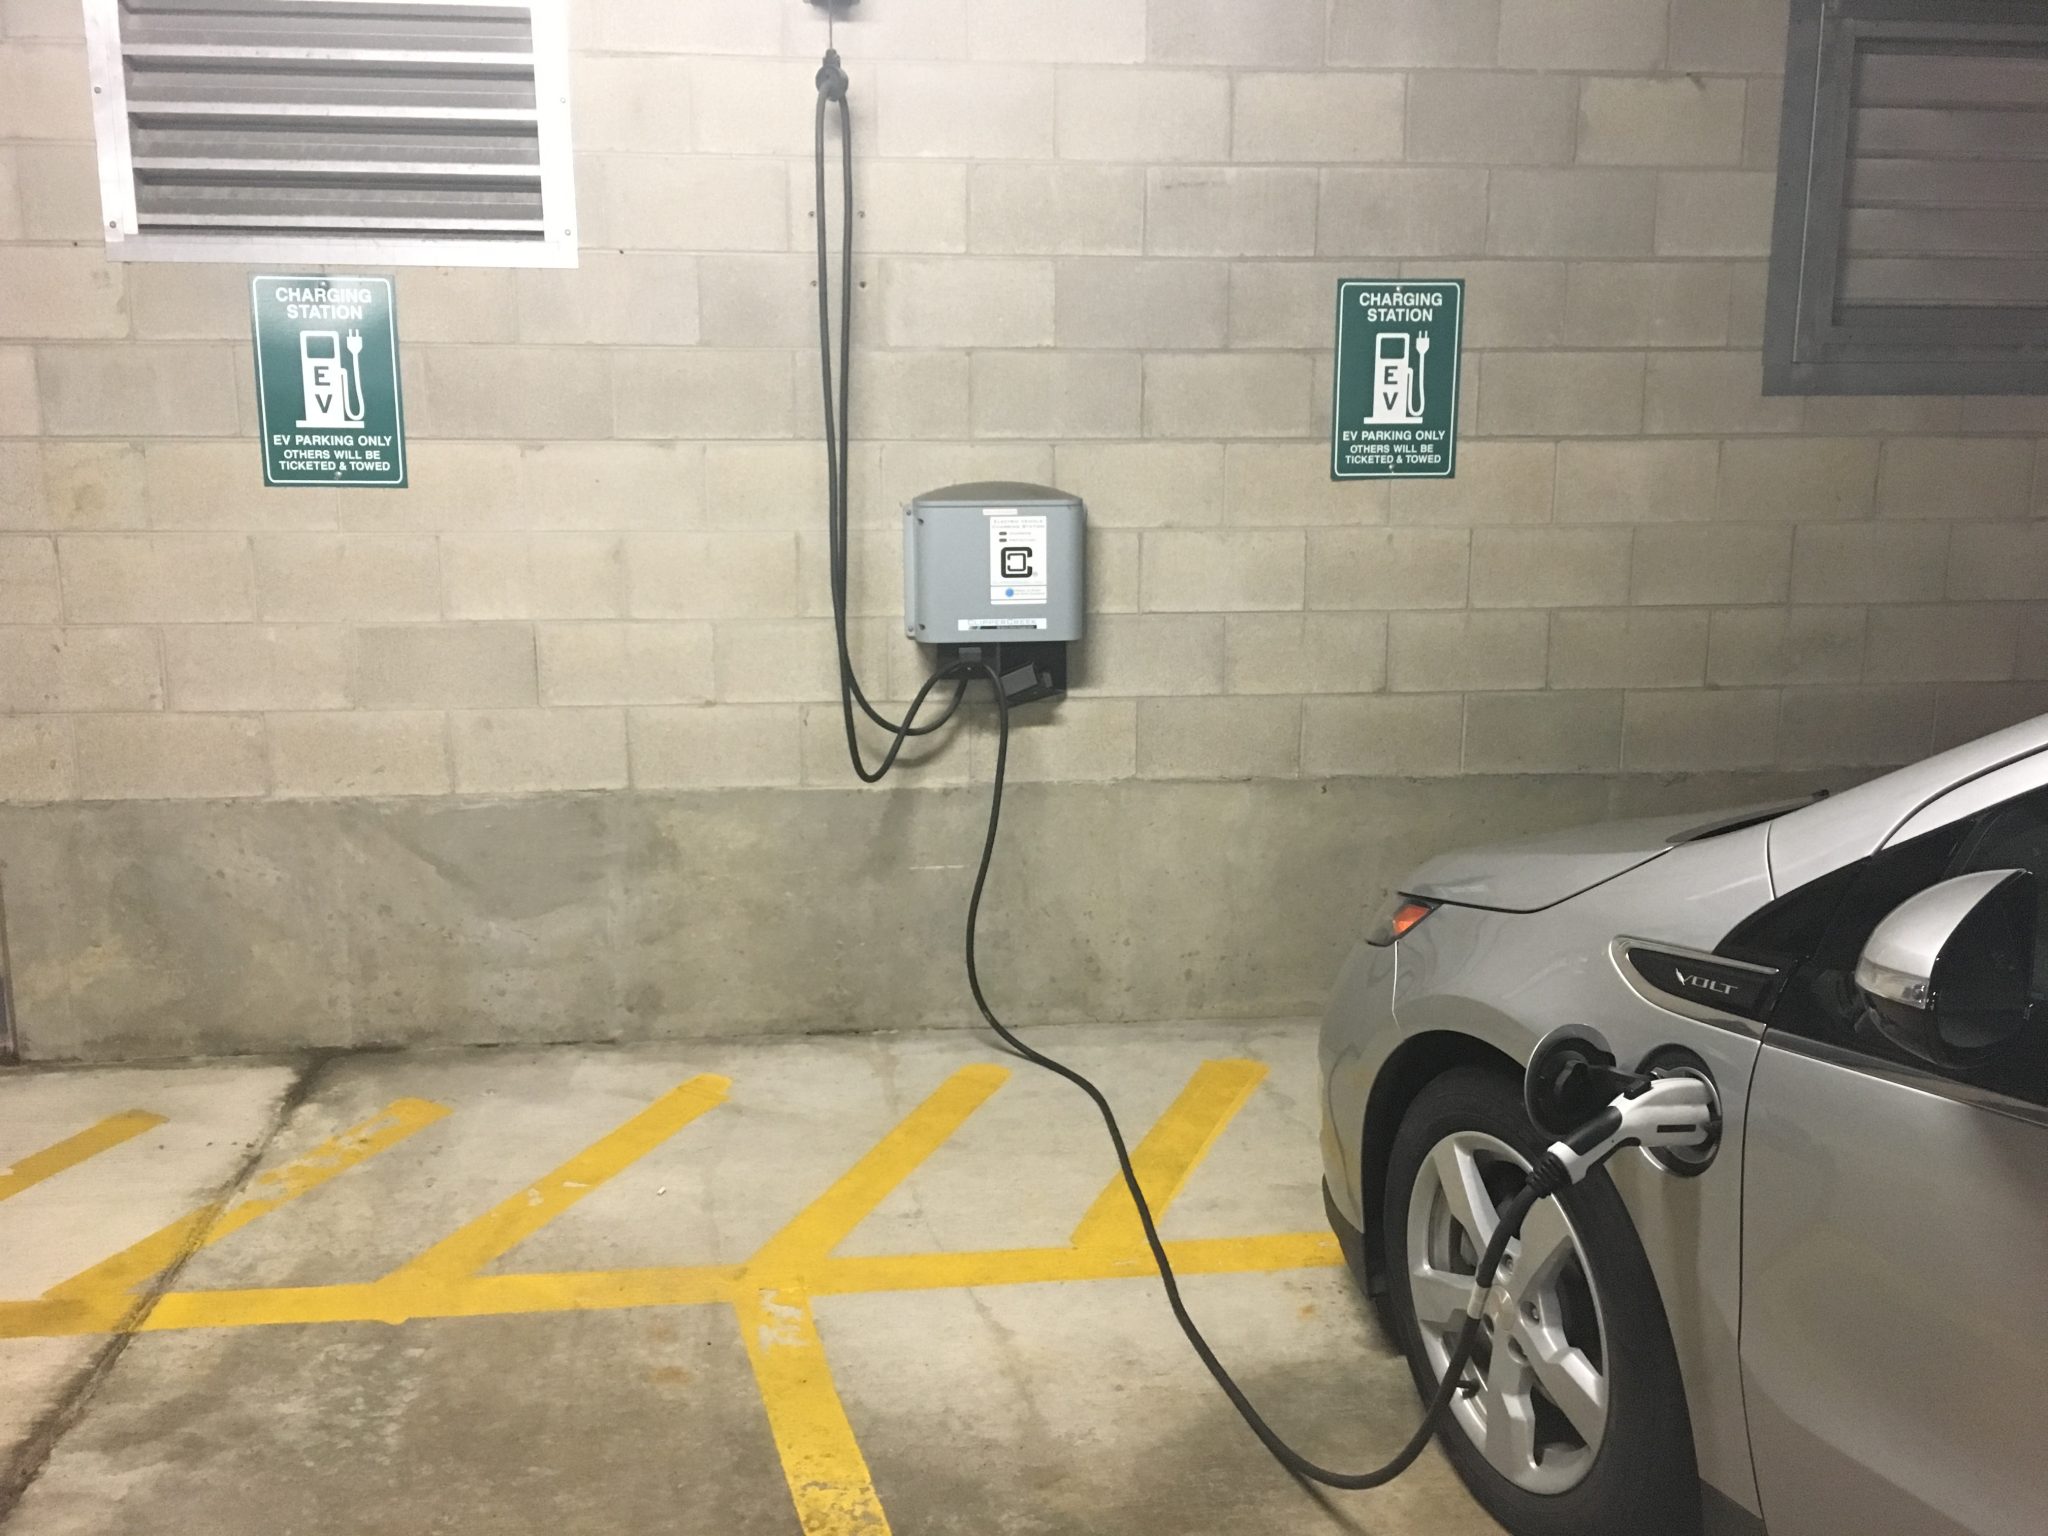 Electric Vehicle Charging Station 2 7.6.17-jn